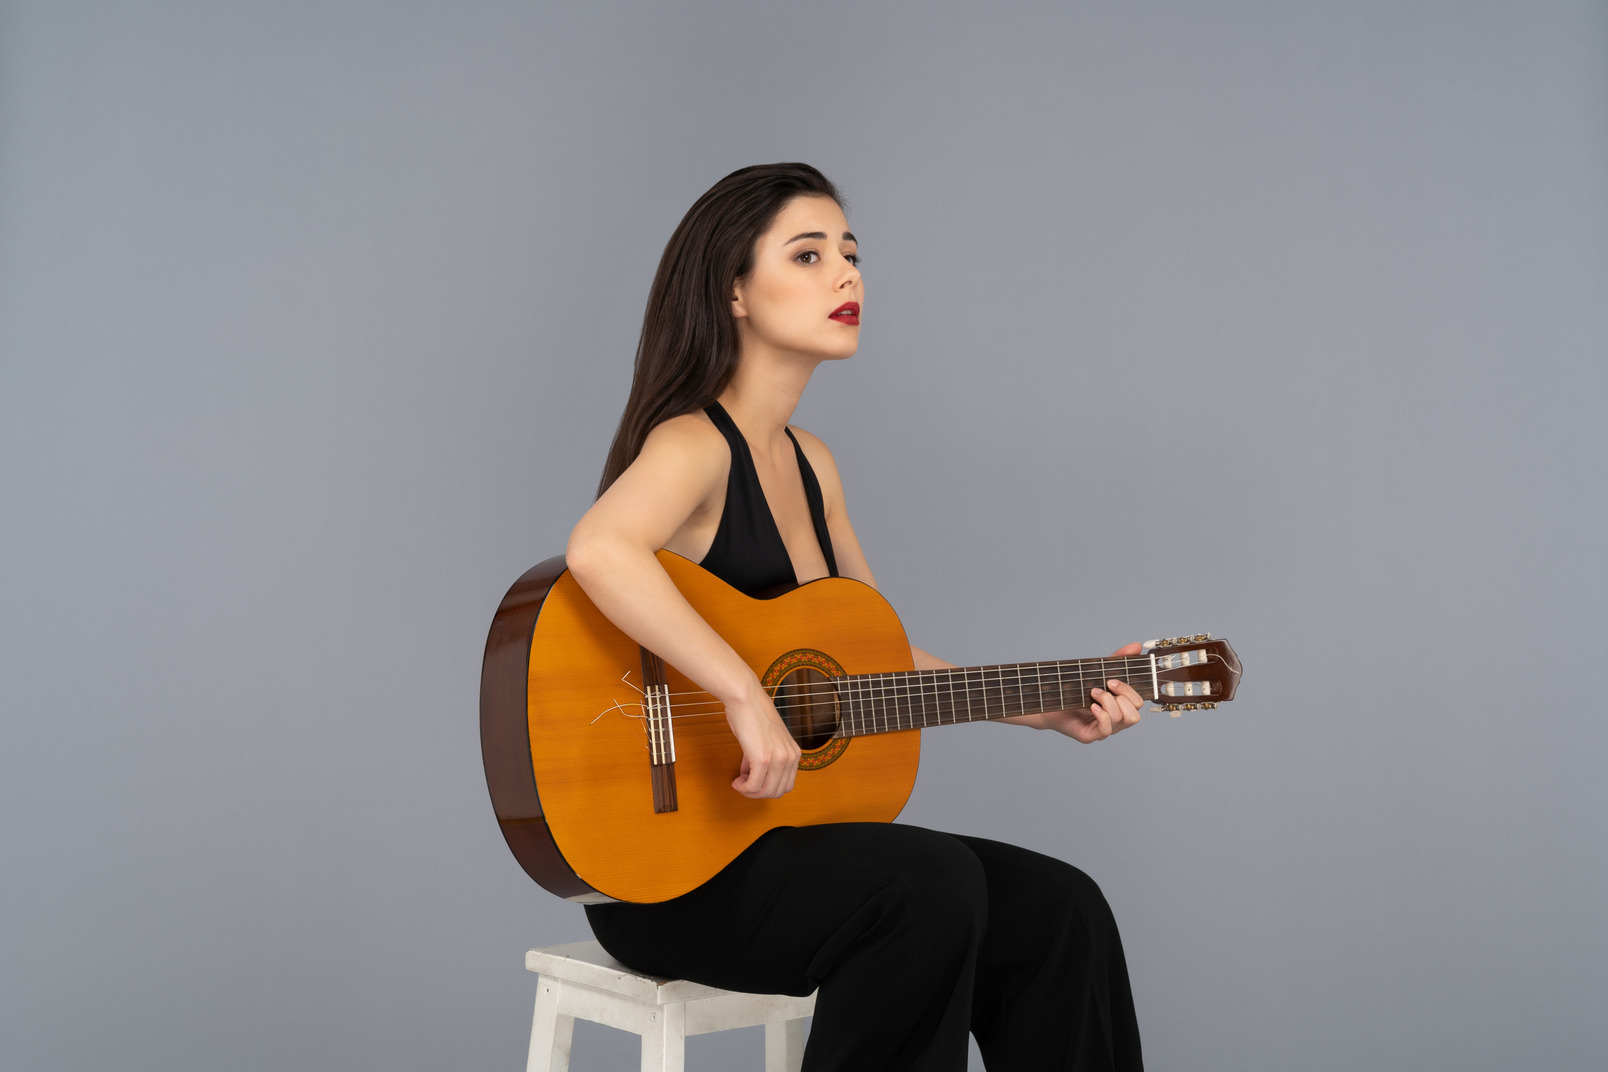 Sad young woman sitting with guitar in hands